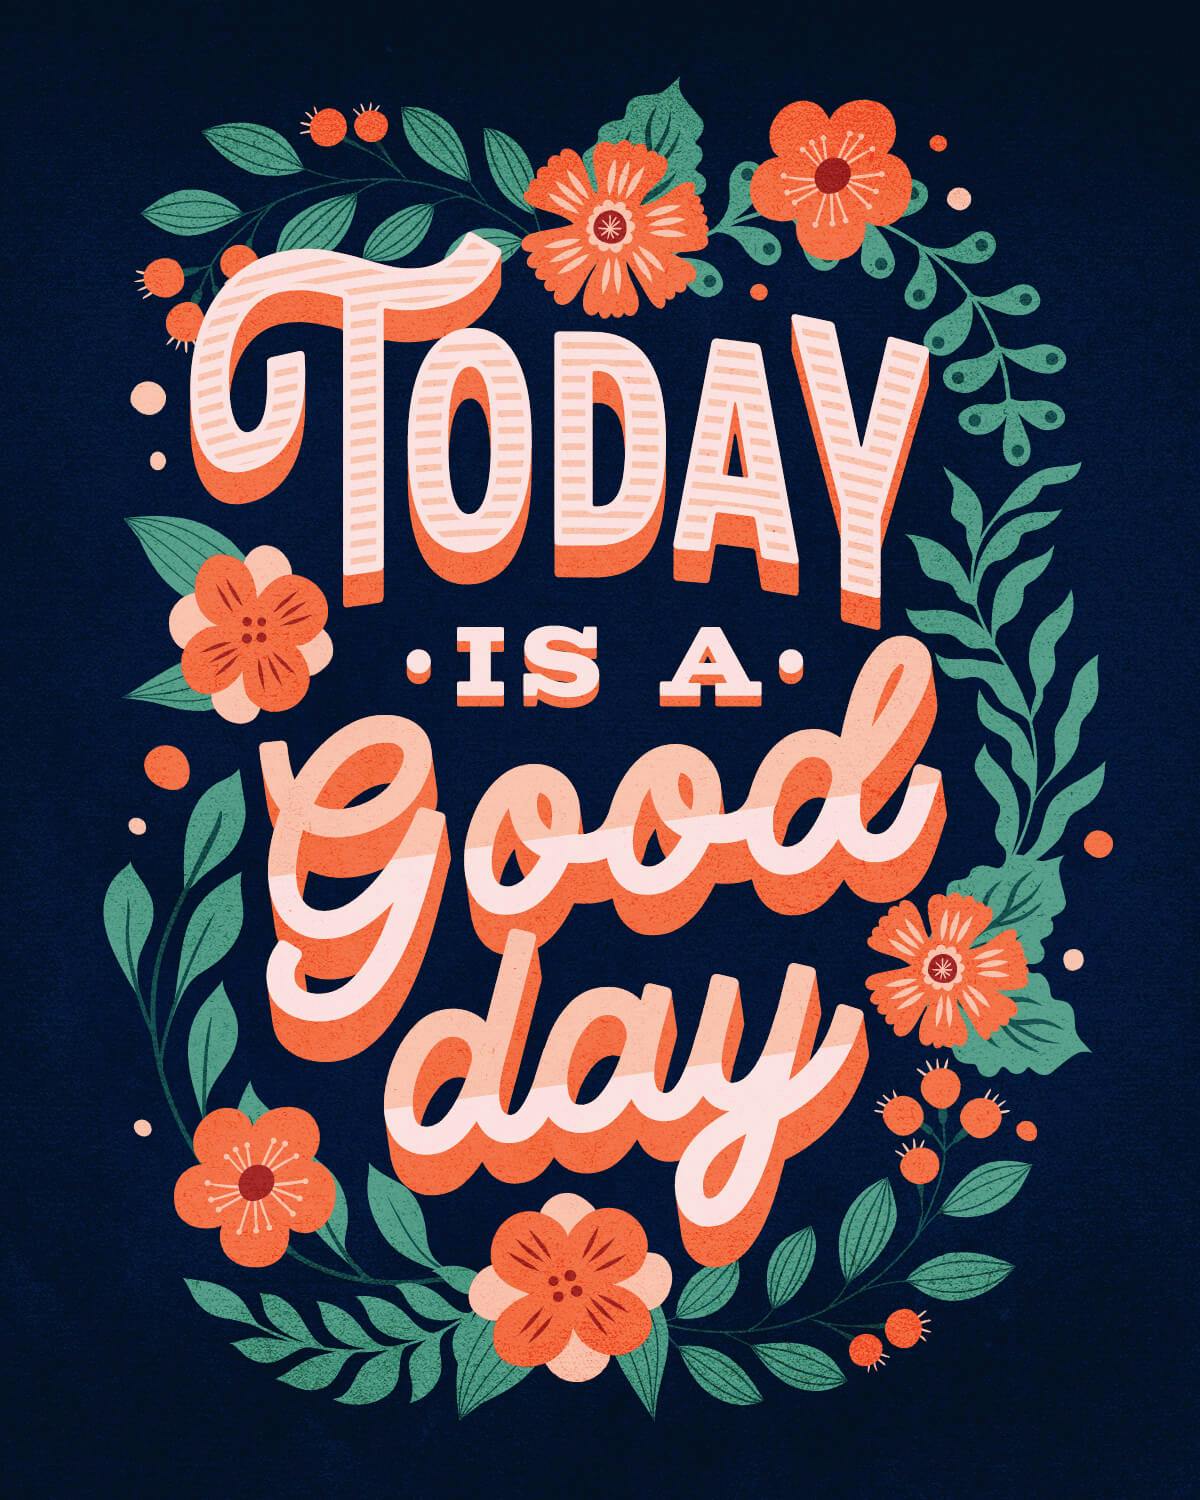 https://images.prismic.io/kittlblog/24dfc496-32b6-4e14-bc55-aea9ee141c39_today-is-a-good-day-lettering-artwork-flowers-motivation.jpg?auto=compress,format